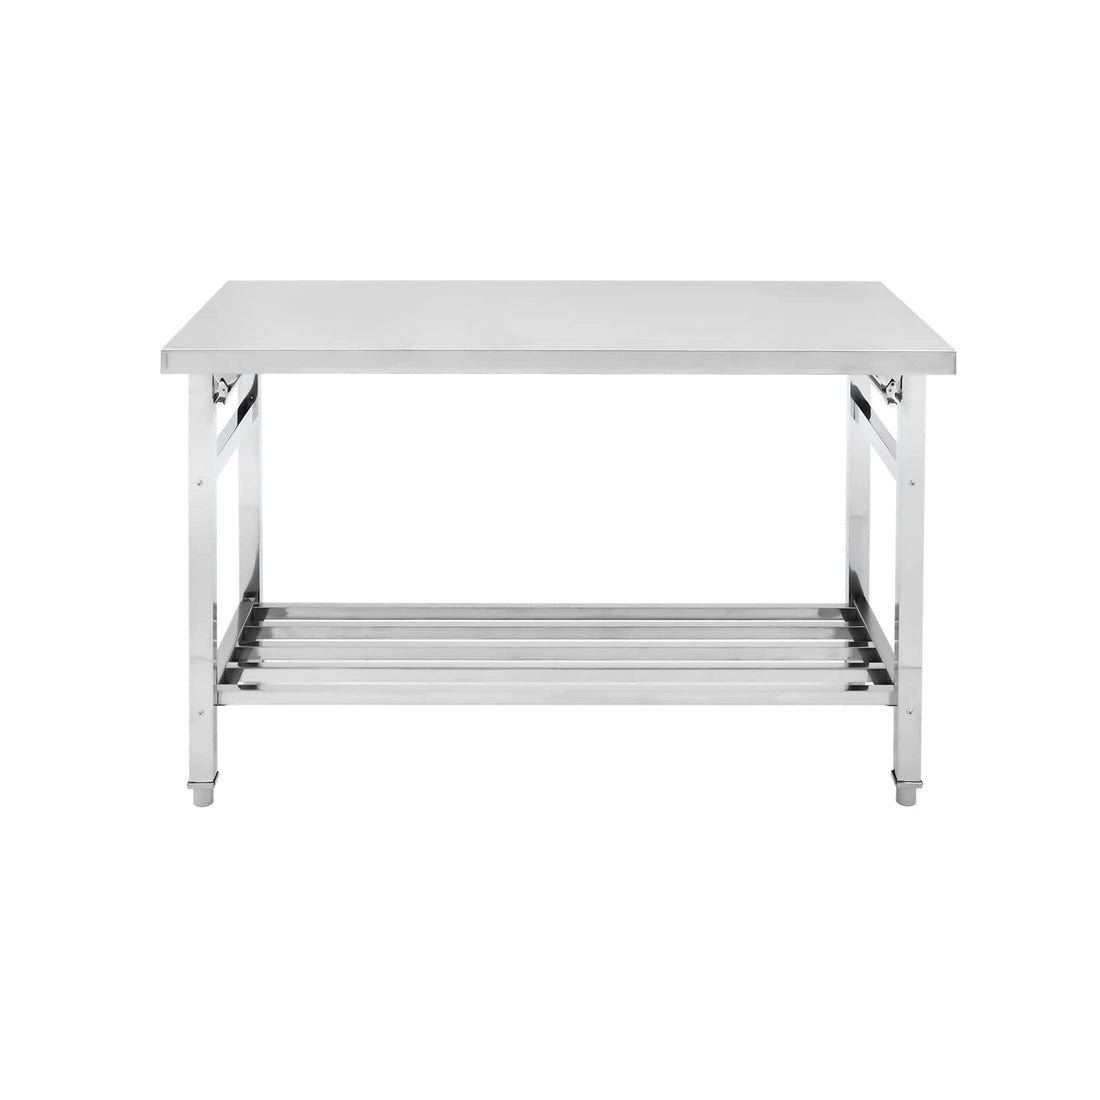 GARVEE Stainless Steel Prep Table 48 x 24 Inch NSF Commercial Heavy Duty Stainless Steel Work Folding Table